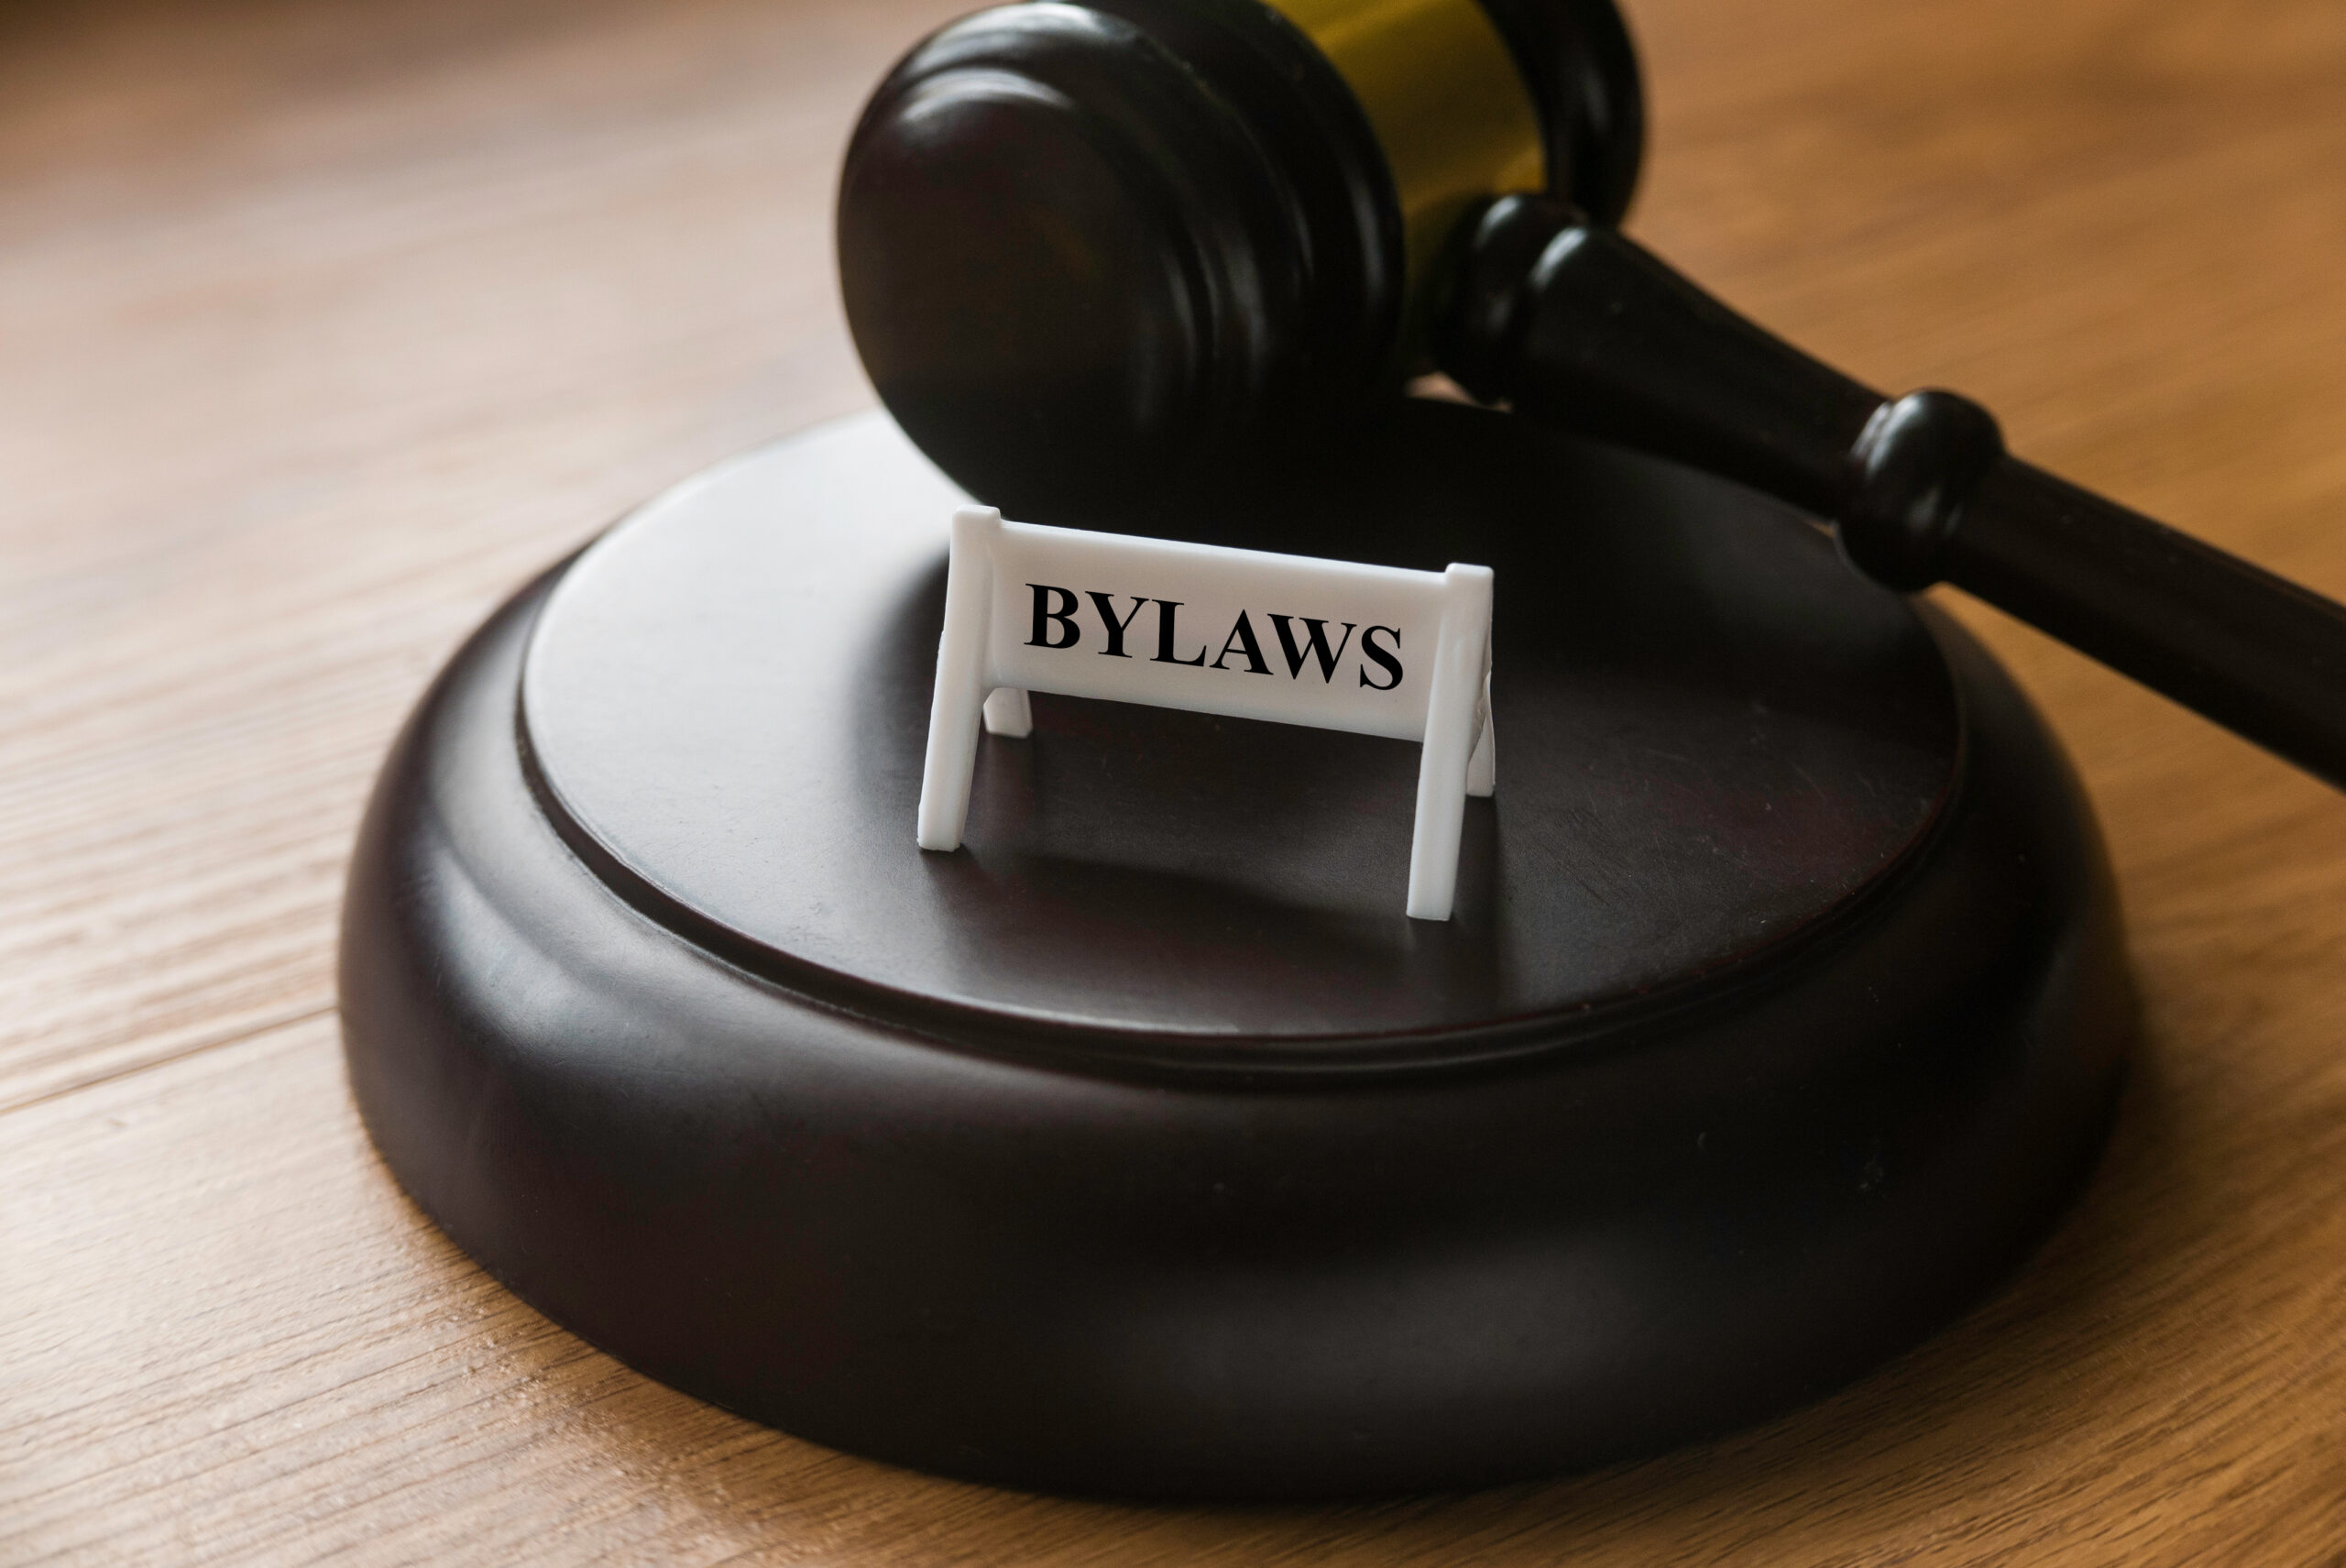 Bylaws phrase with gavel on wooden background